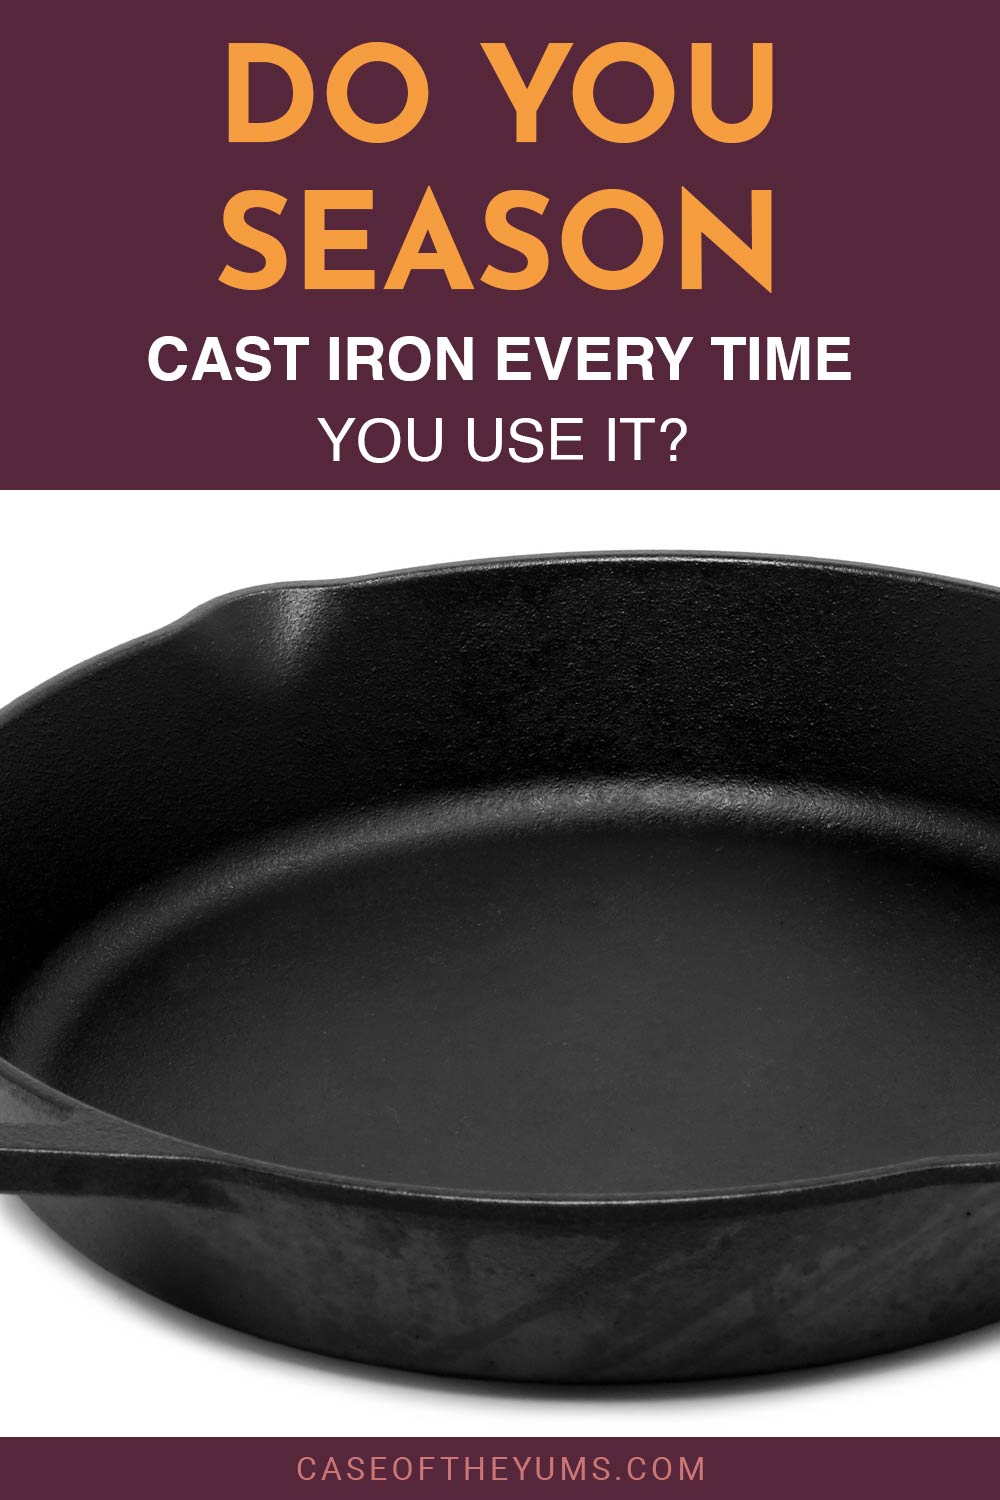 Cast iron pan on a white surface - Do You Season Cast Iron Every Time You Use It?